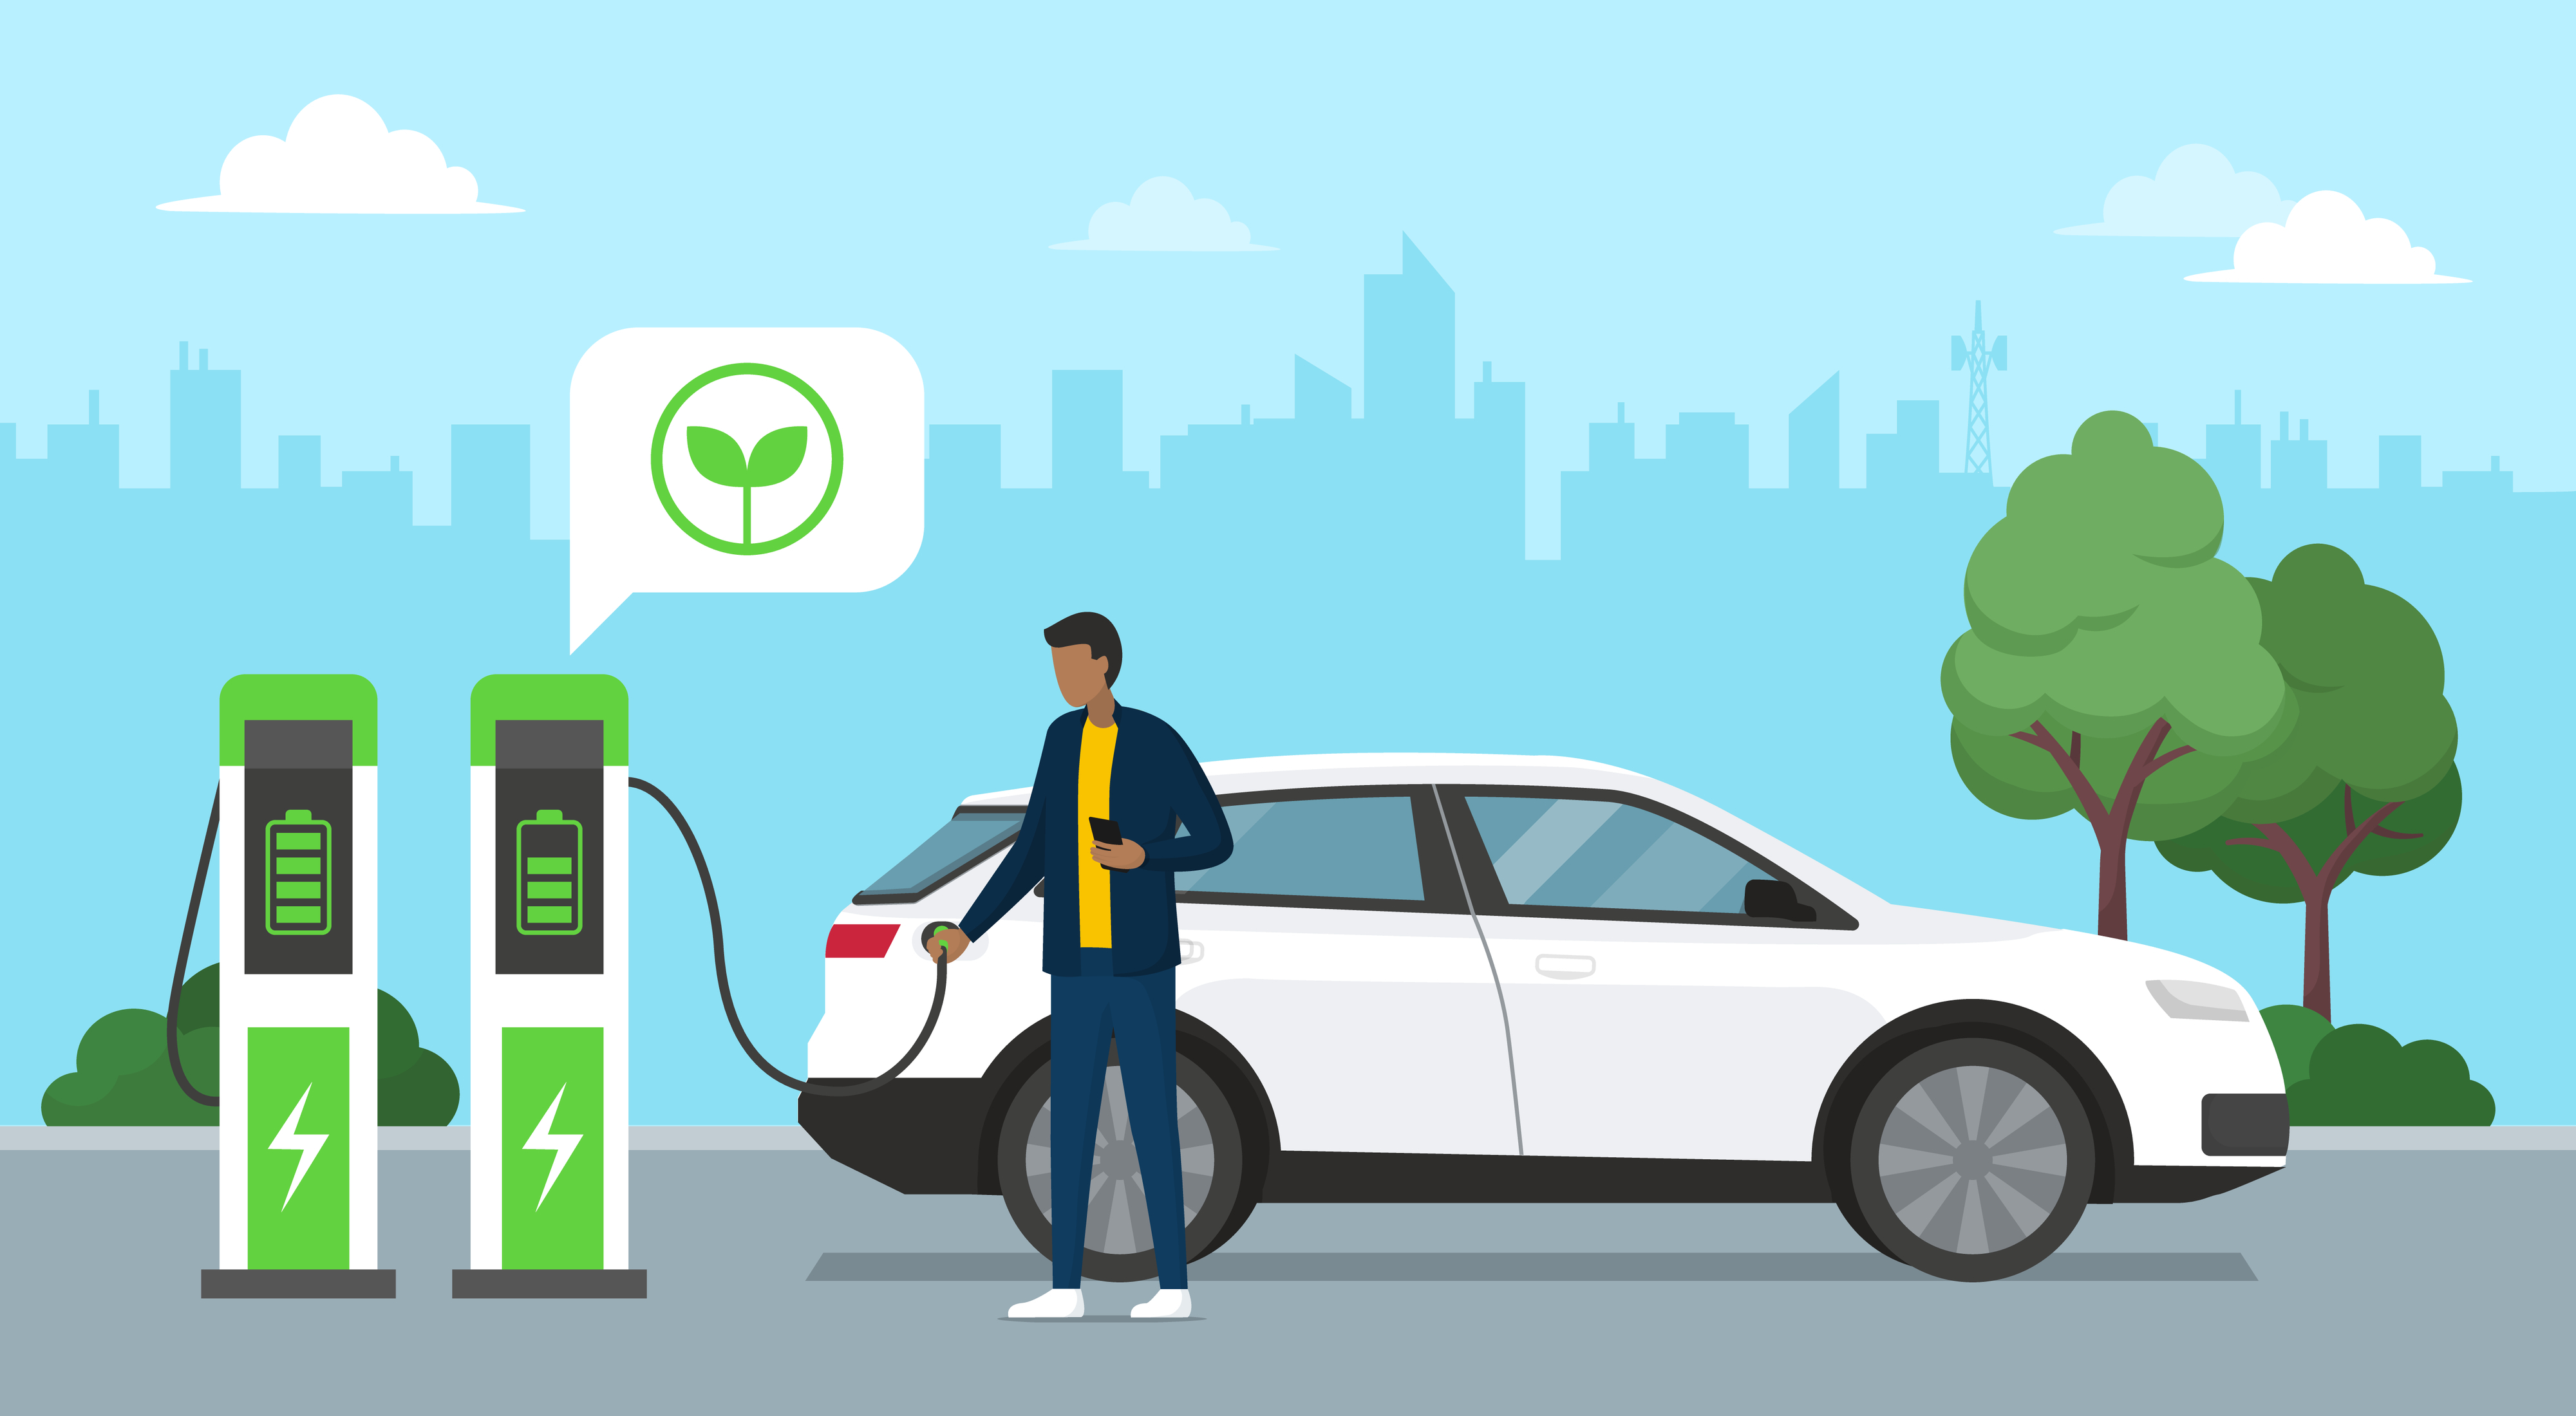 Location-Analytics in Site Selection for EV Charging Stations